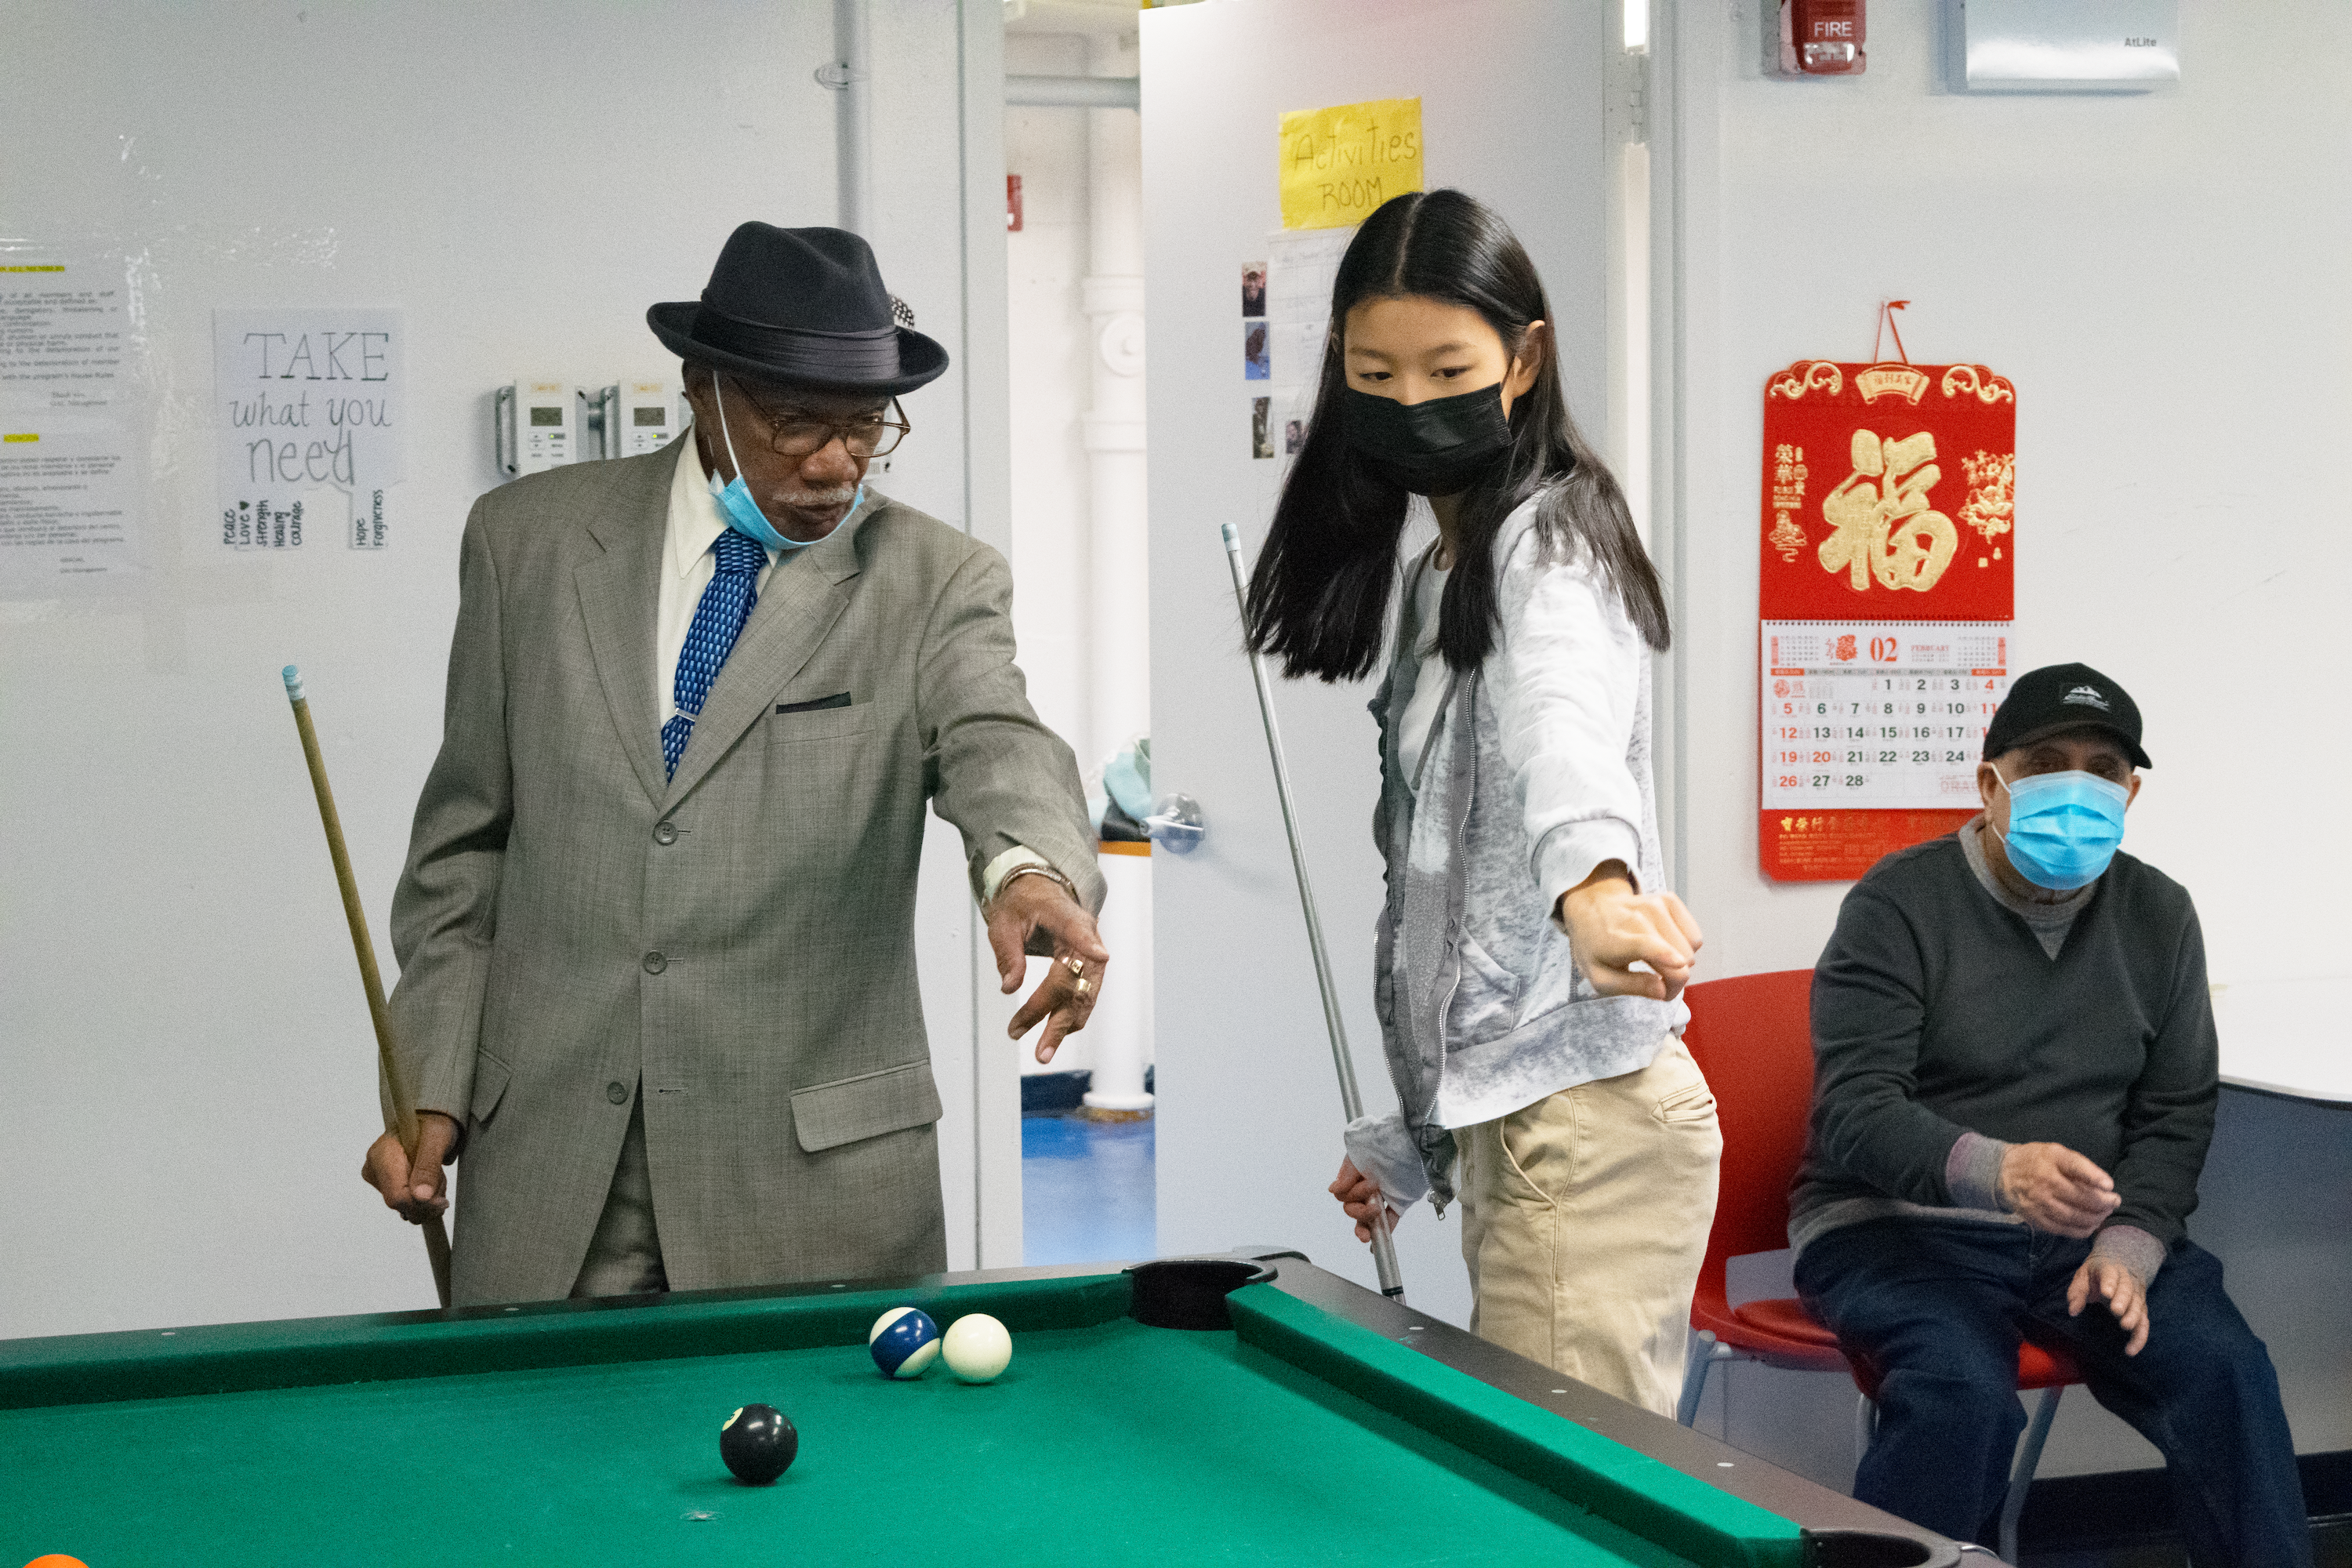 A teen volunteer plays pool with a member of the Henry Street Settlement Older Adult Center